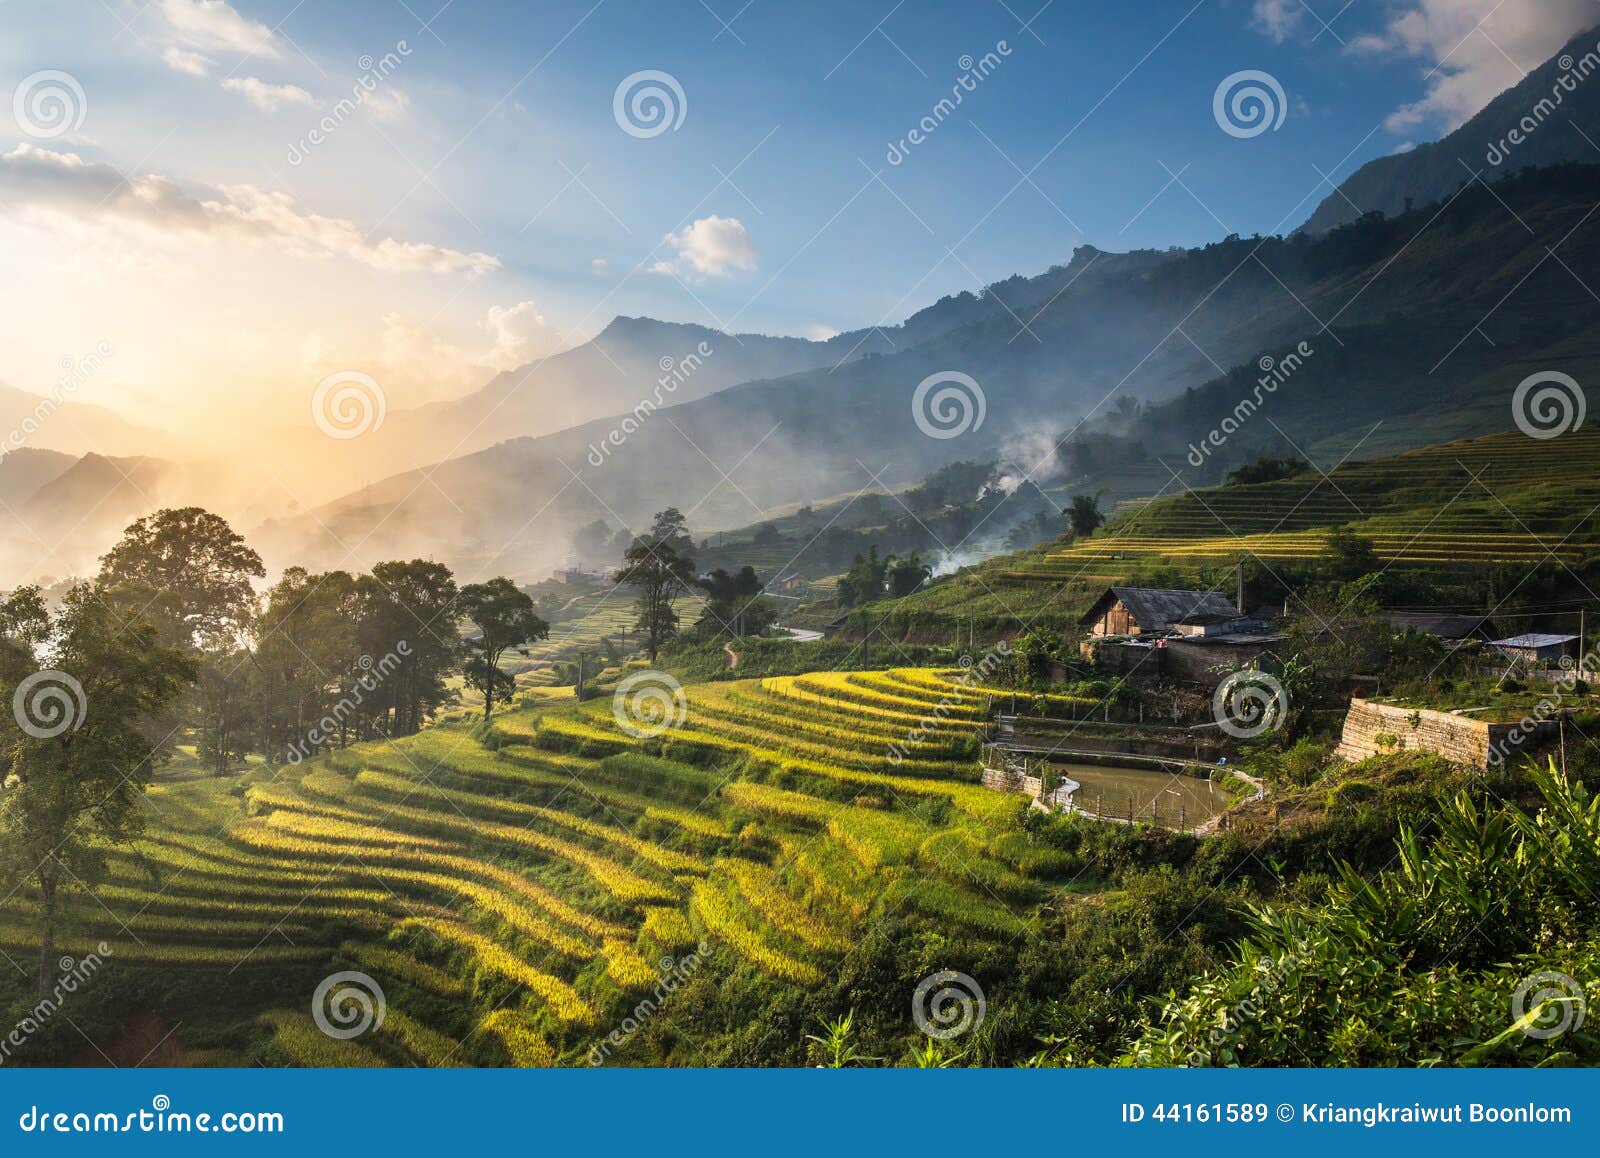 rice fields on terraced in sunset at sapa, lao cai, vietnam.